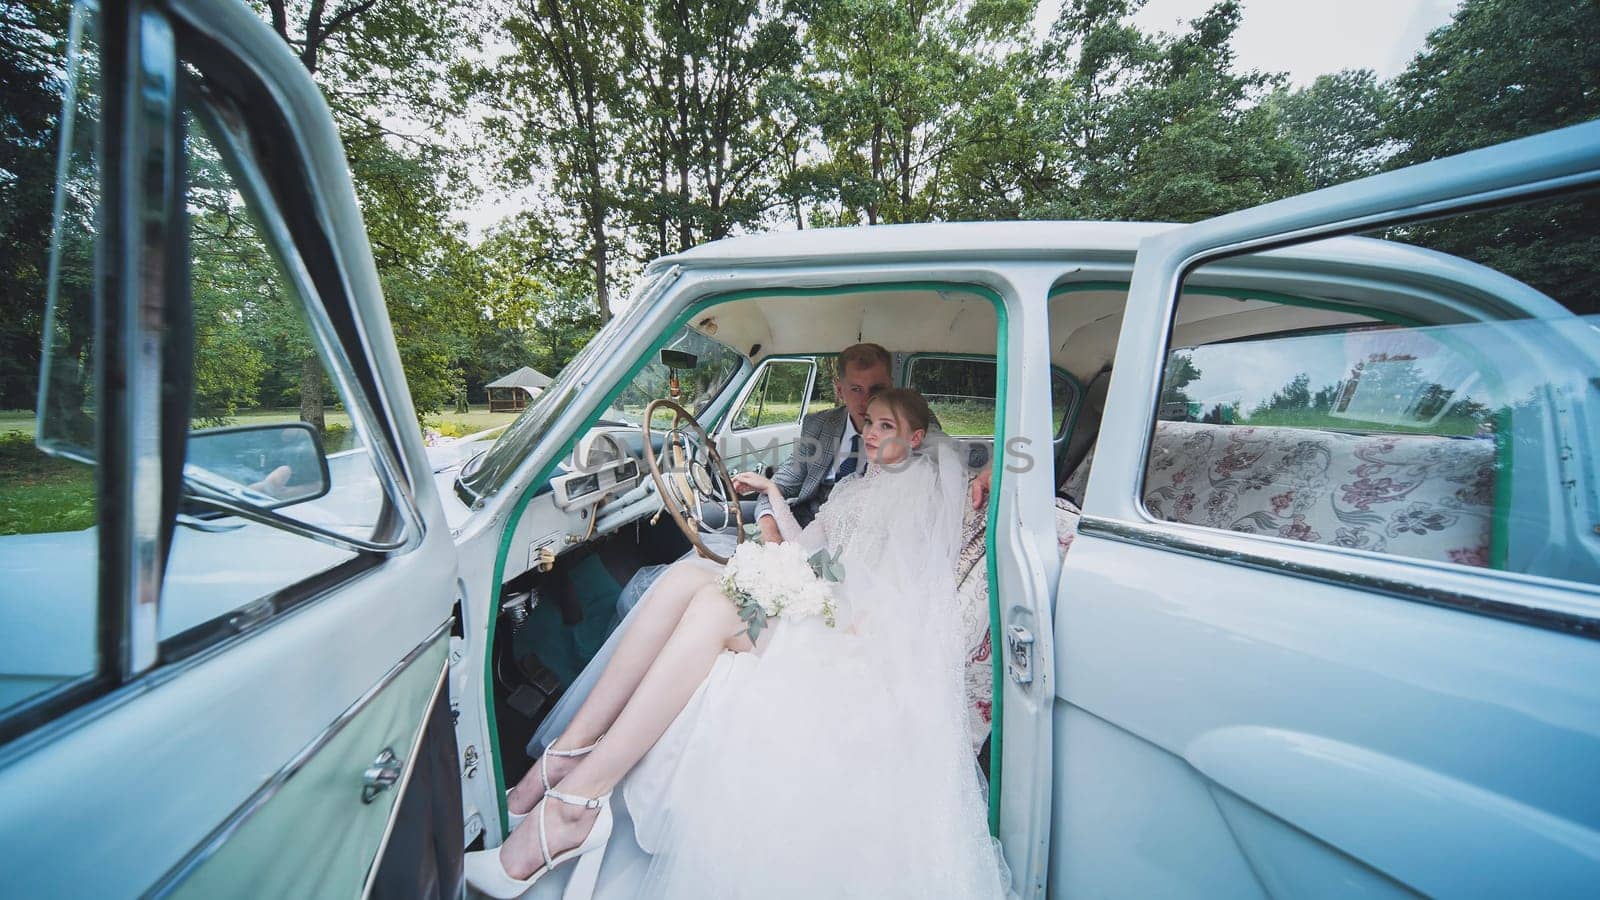 Bride and groom enjoying each other in a retro car. by DovidPro